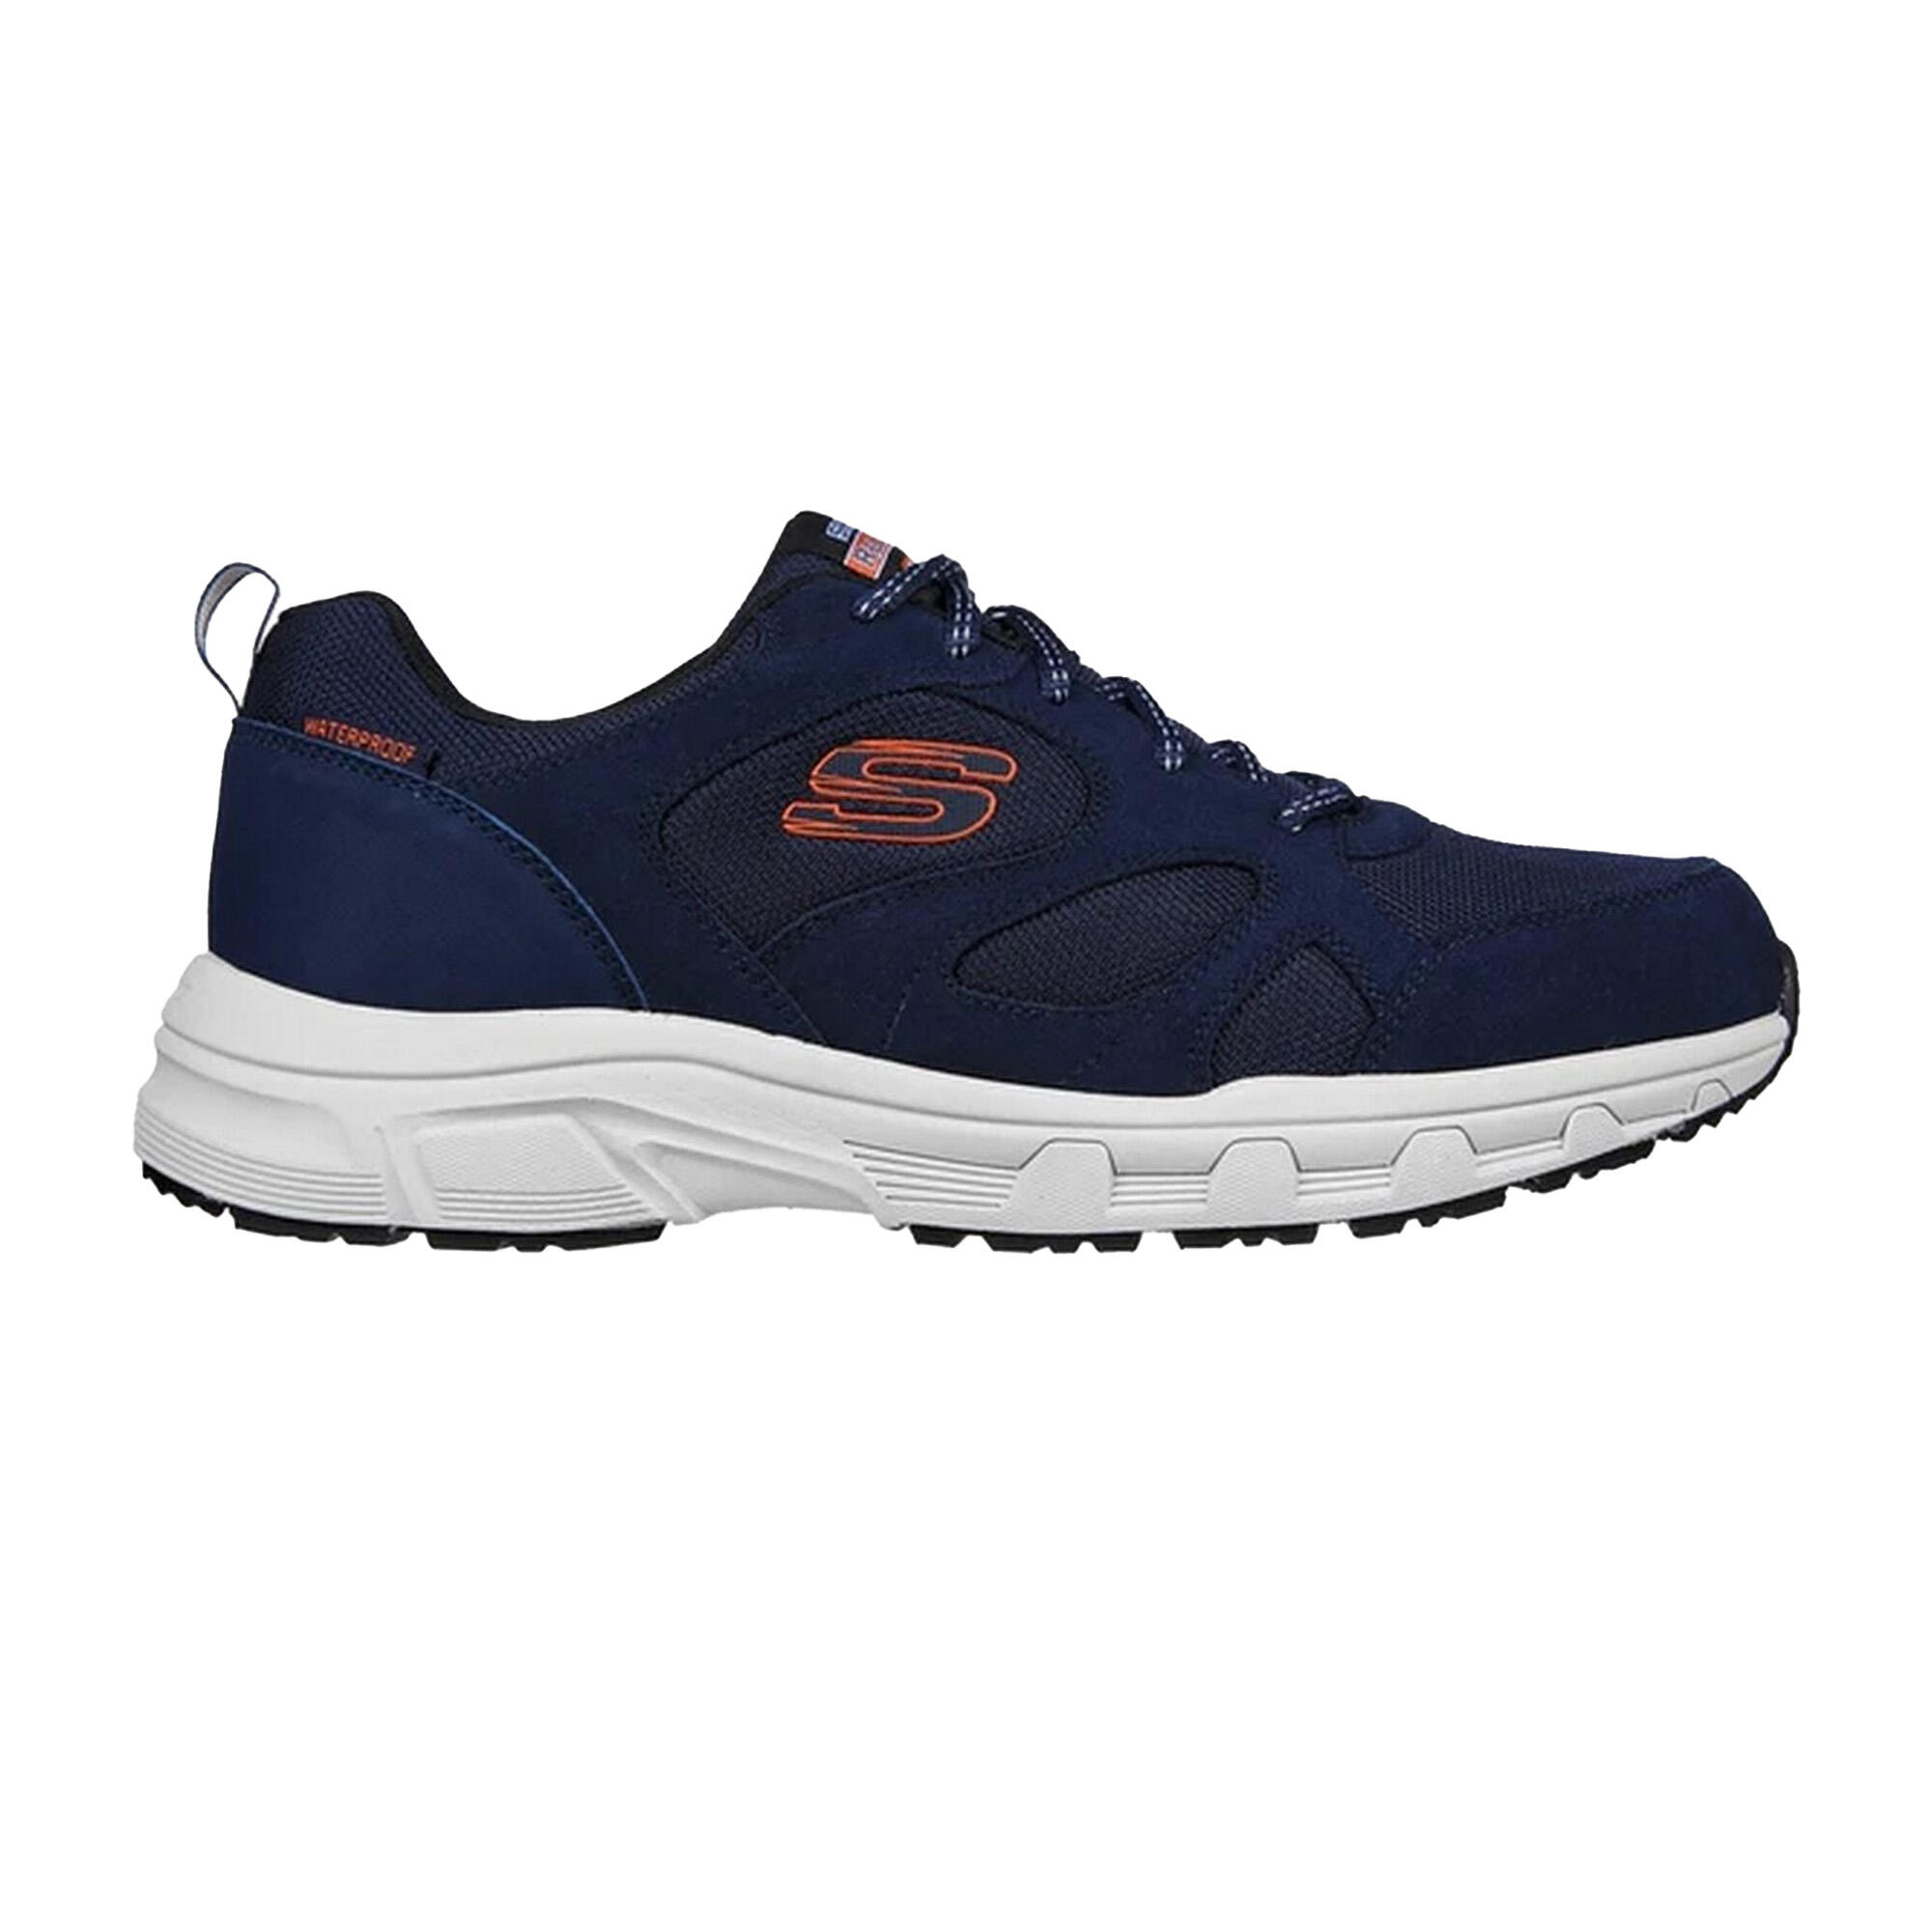 Mens Oak Canyon Sunfair Suede Relaxed Fit Trainers (Navy/Orange) 3/5